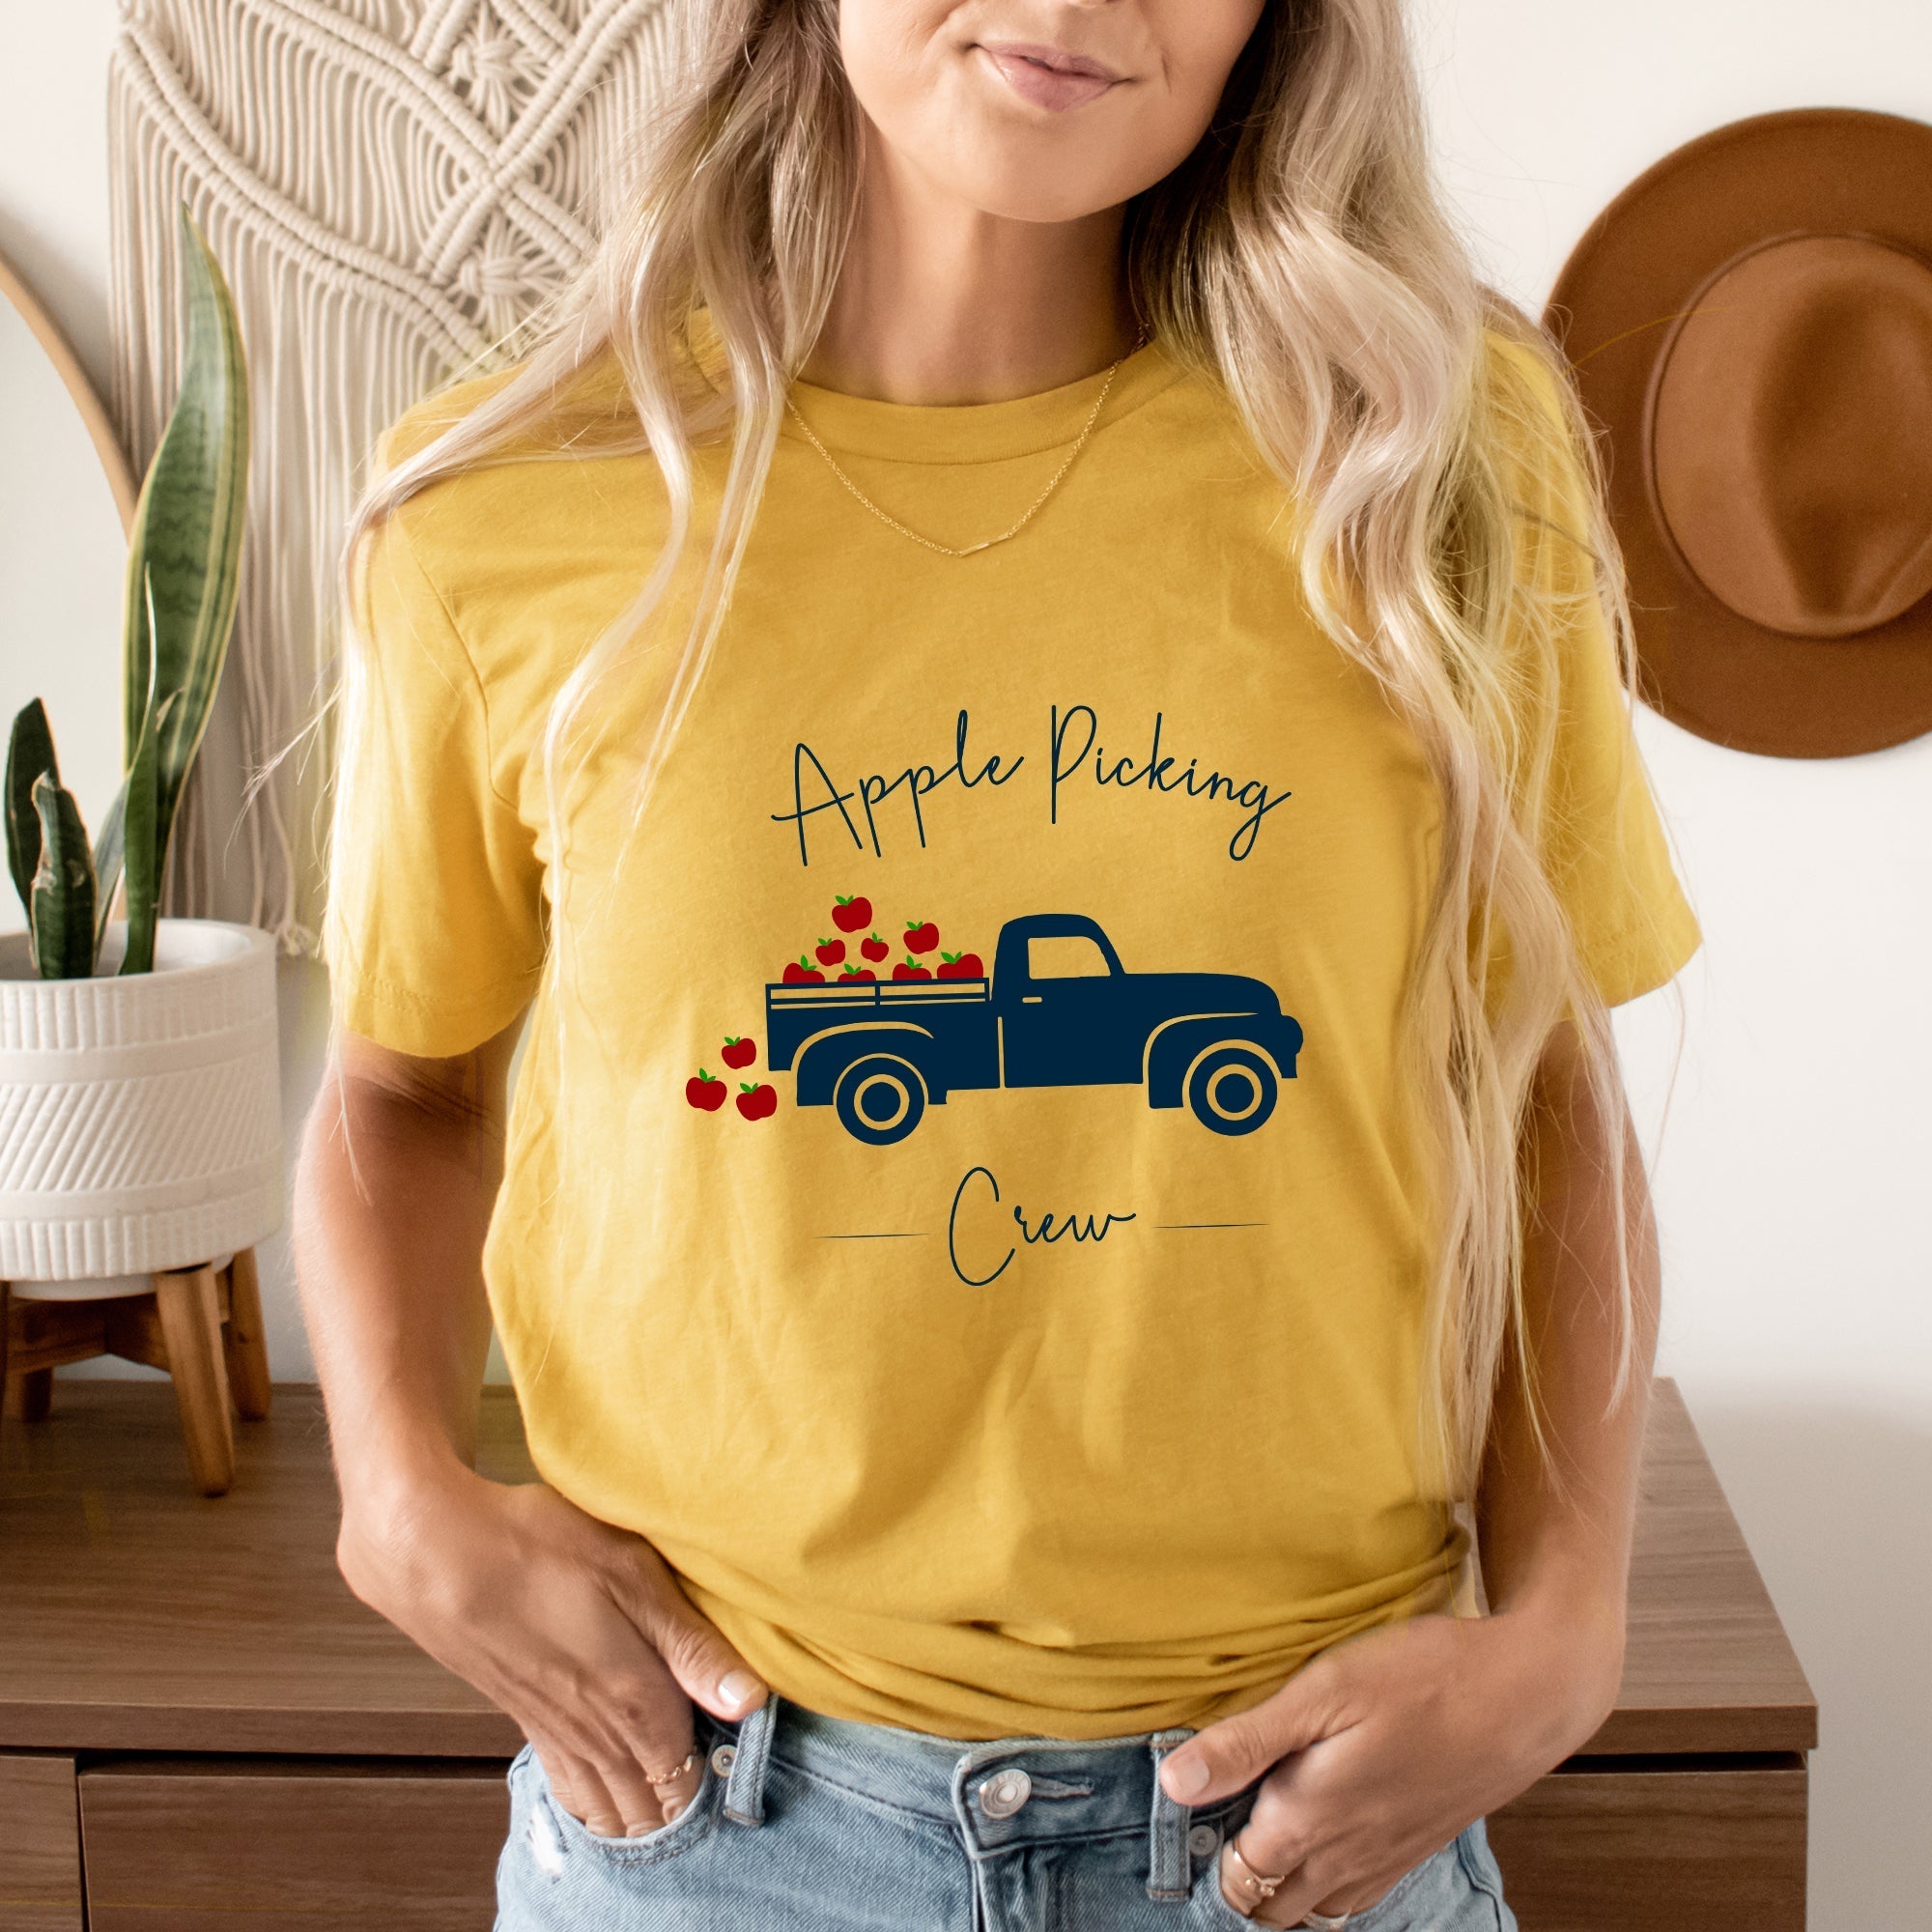 Apple Picking Crew Truck | Short Sleeve Crew Neck Olive and Ivory Retail